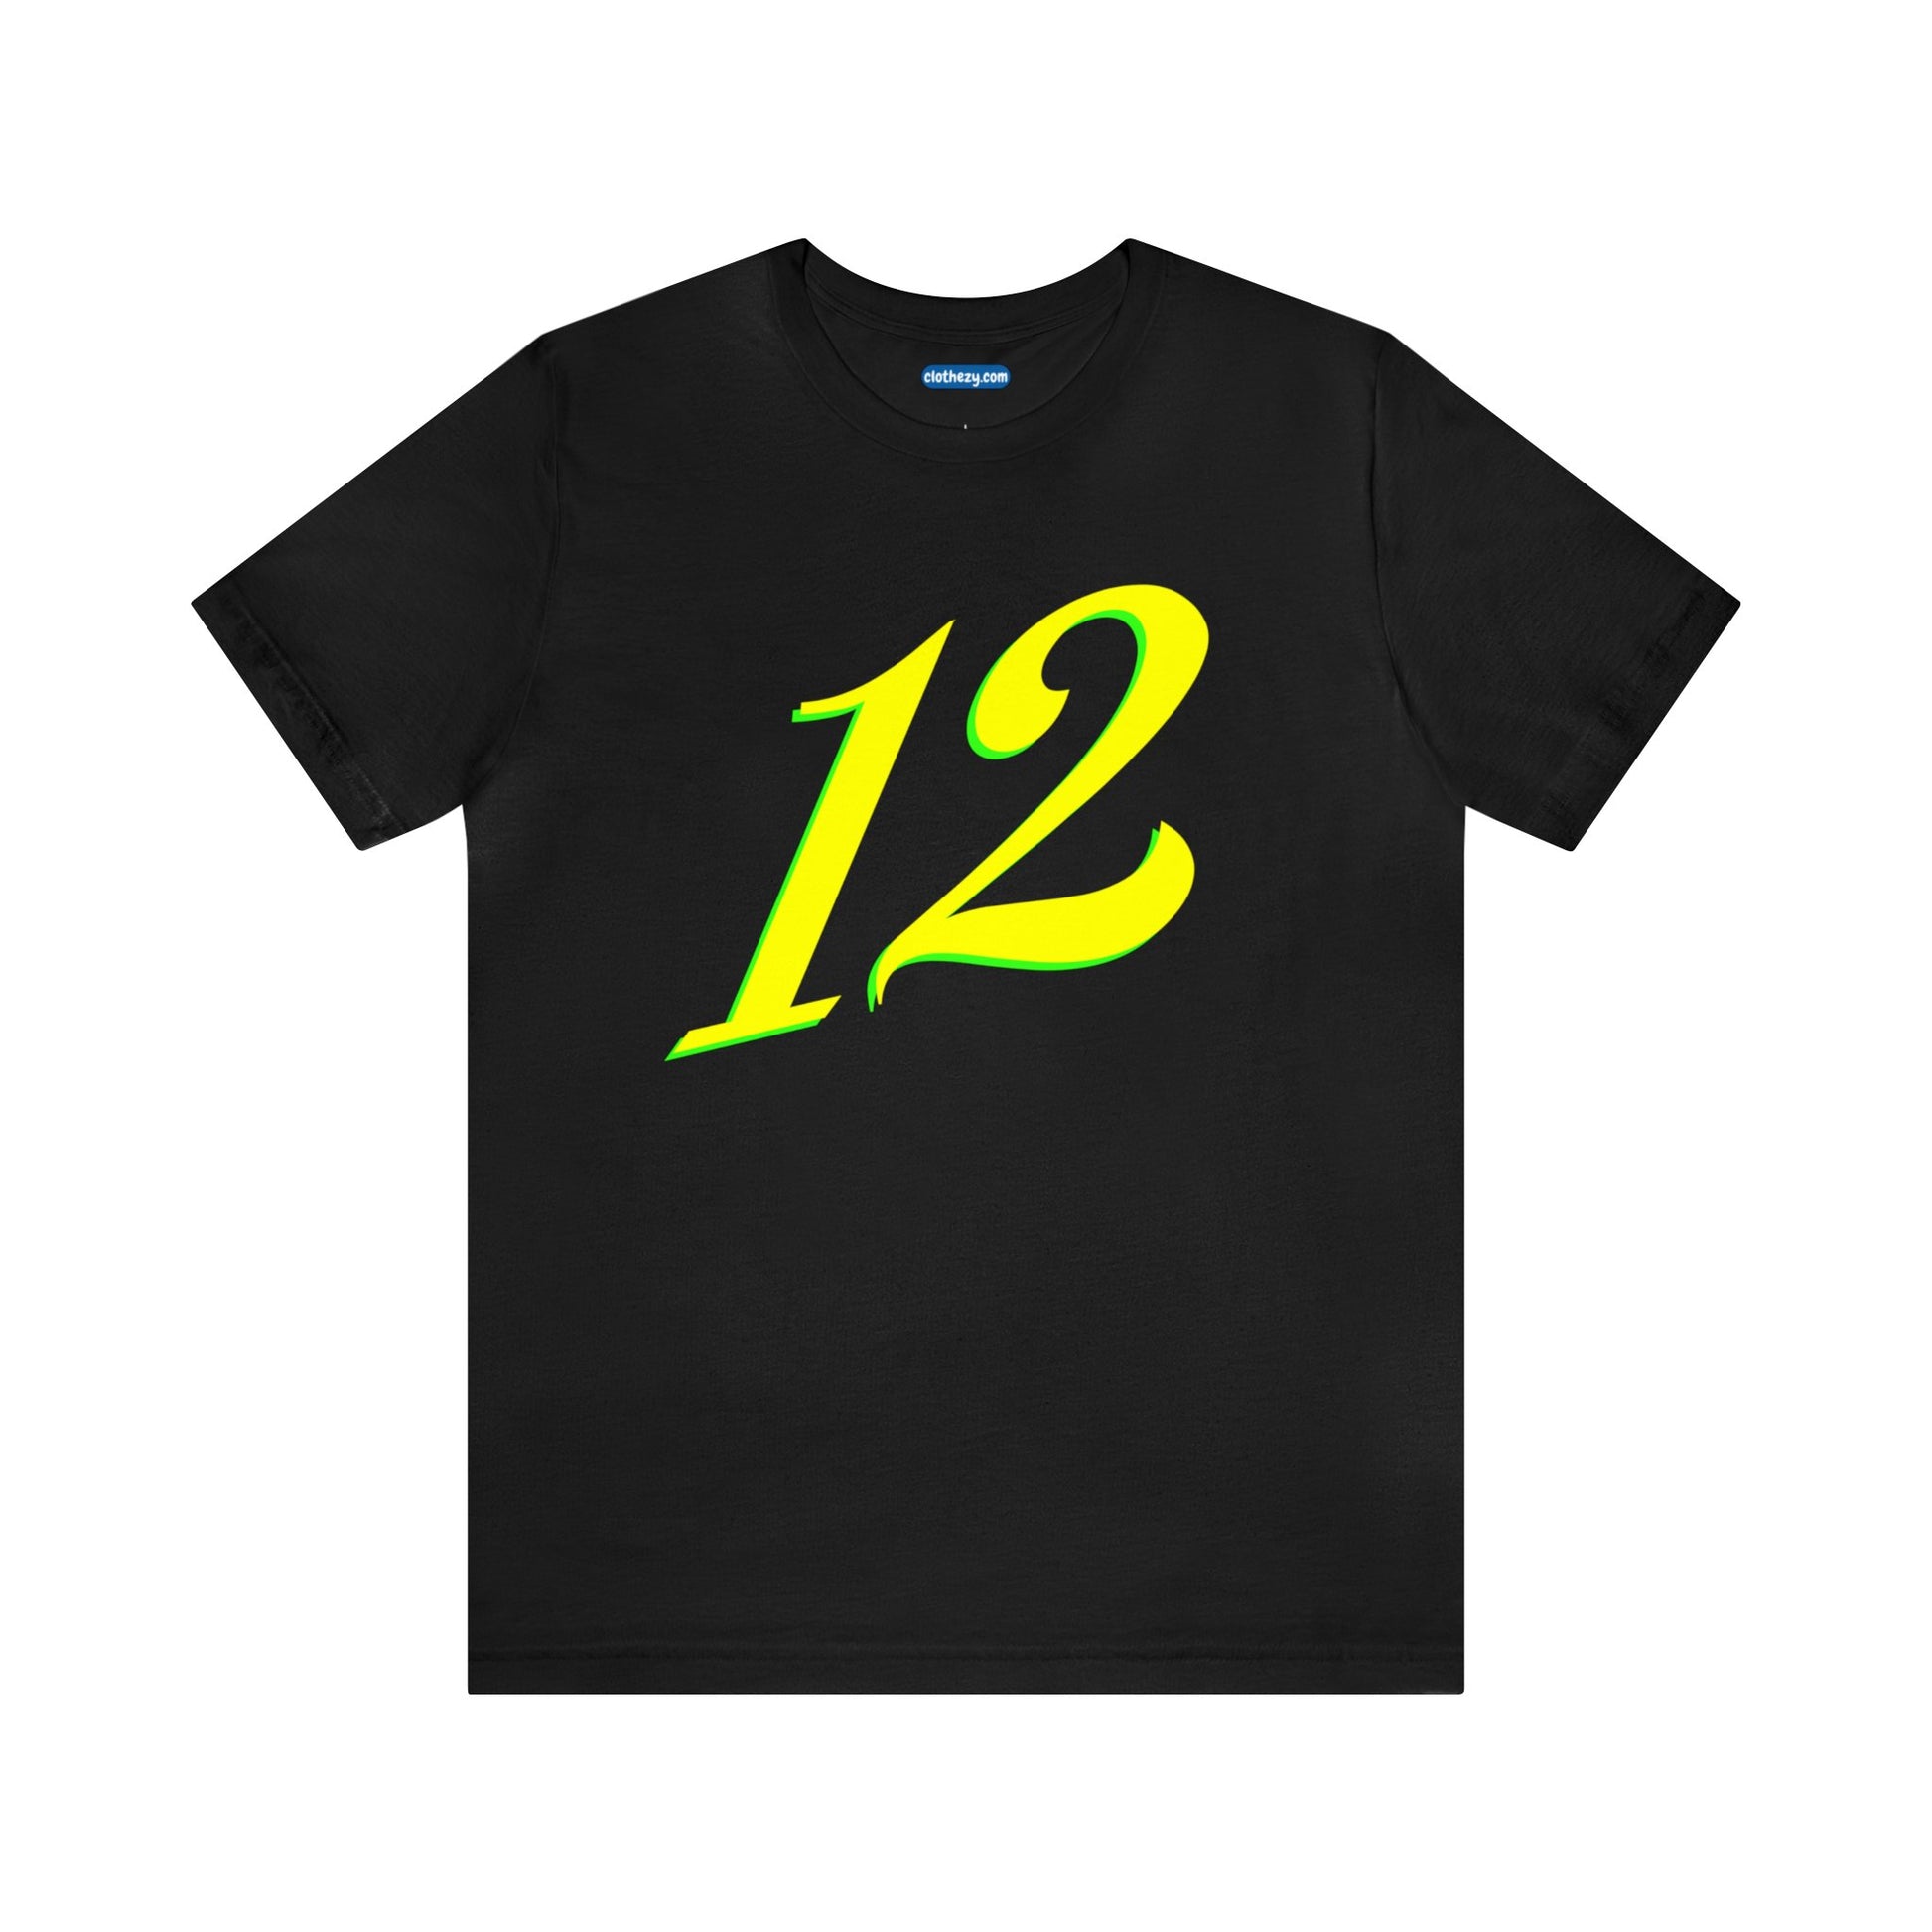 Number 12 Design - Soft Cotton Tee for birthdays and celebrations, Gift for friends and family, Multiple Options by clothezy.com in Dark Grey Heather Size Small - Buy Now